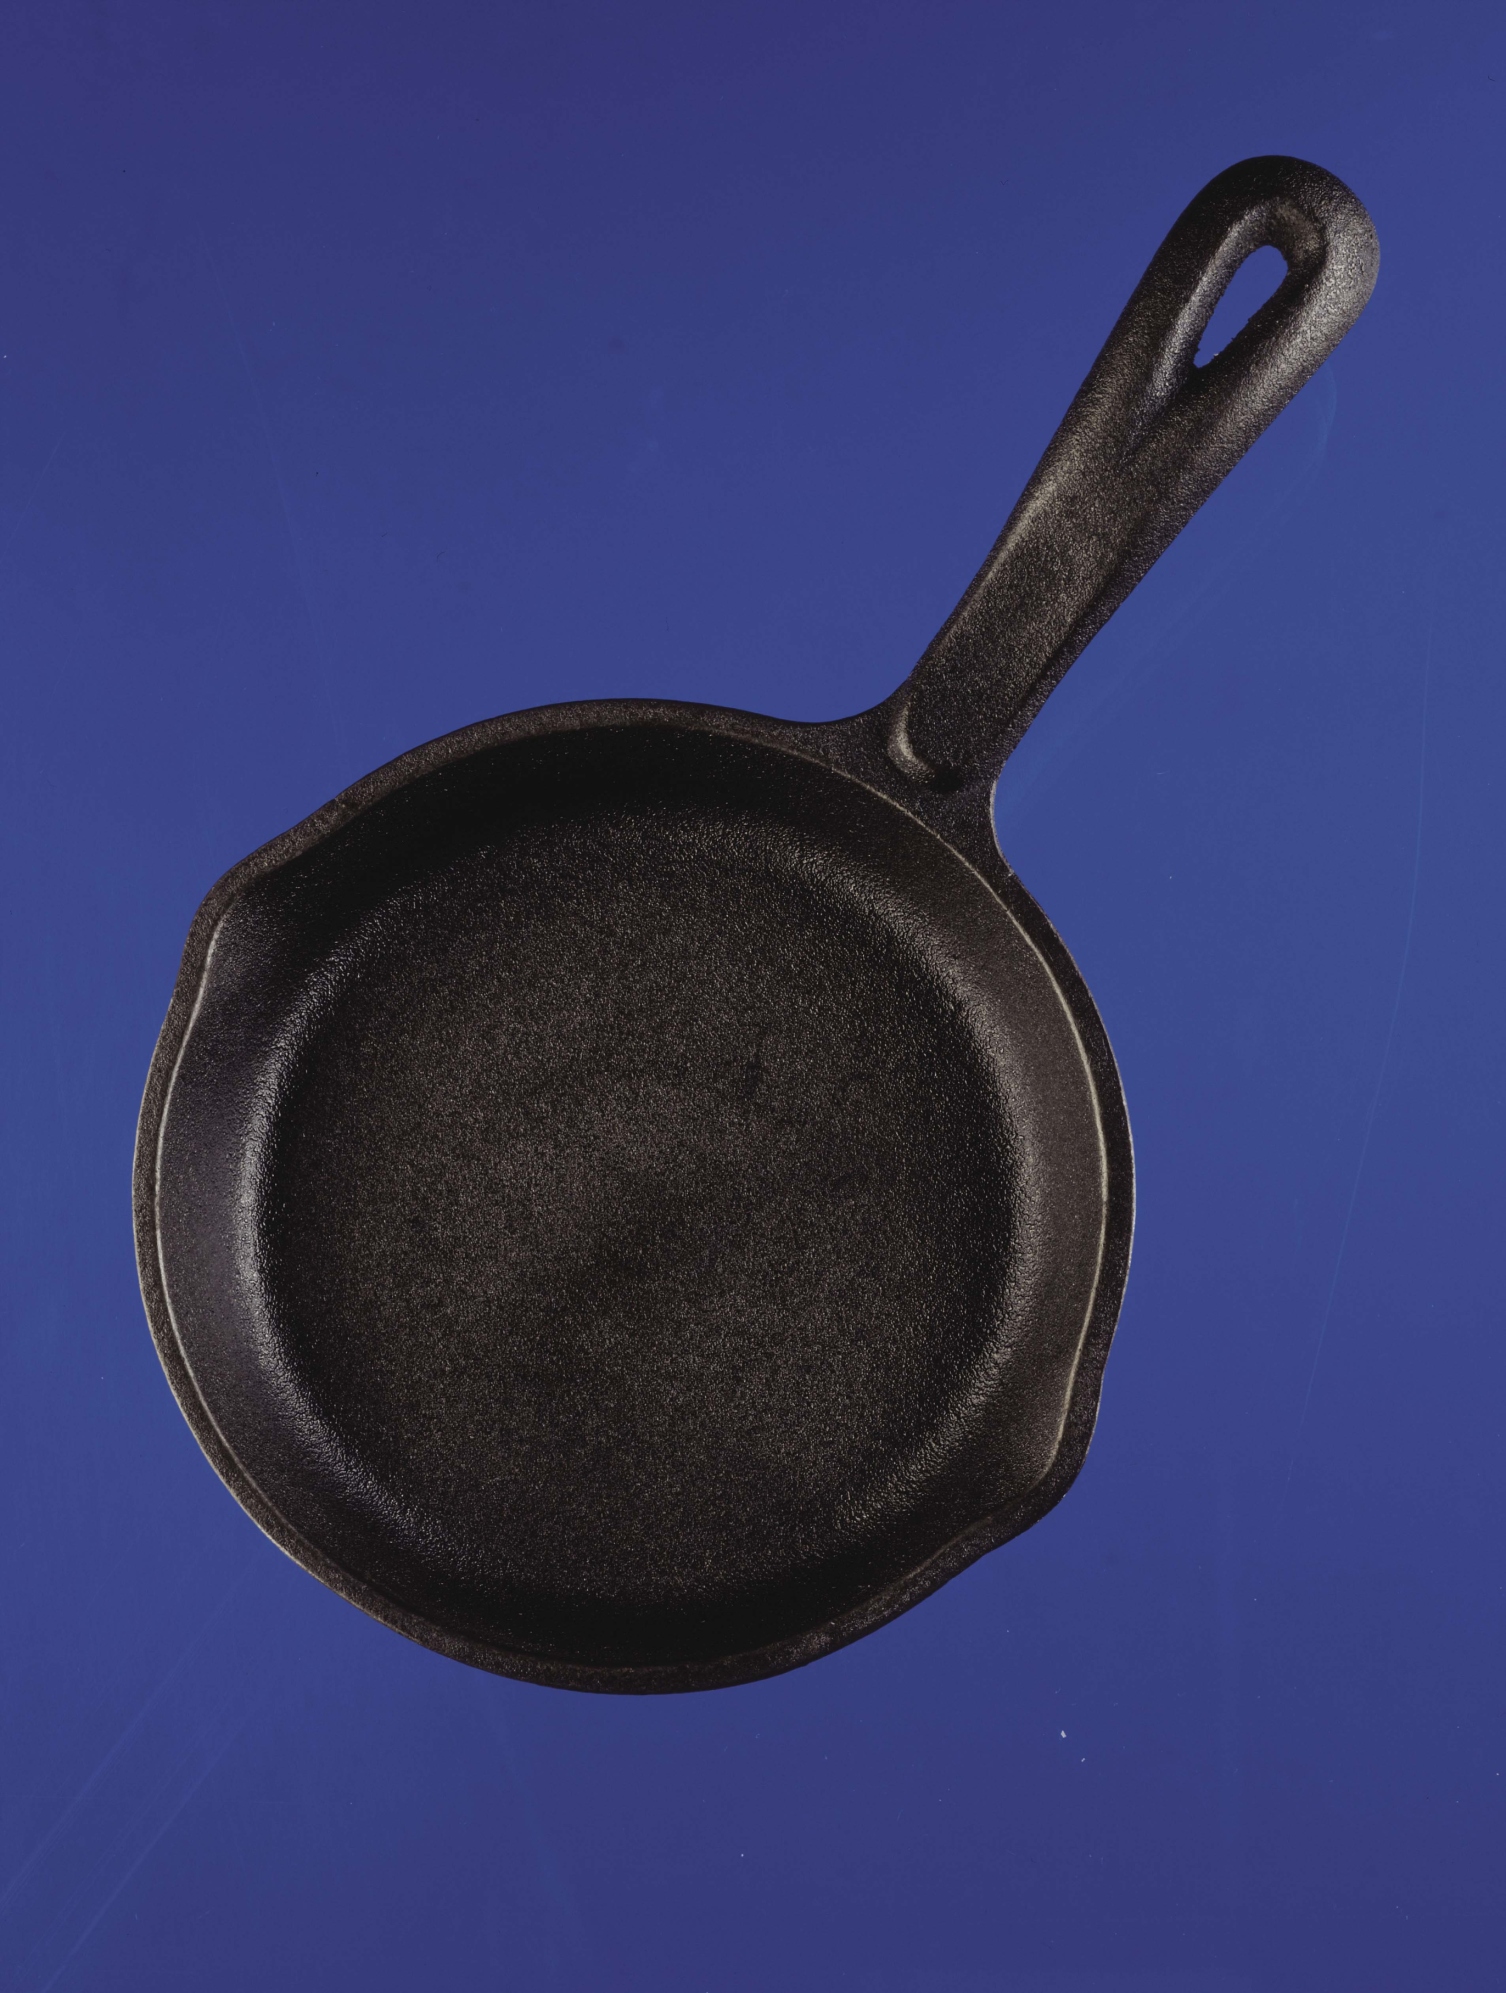 How to Date Wagner Cast Iron Cookware